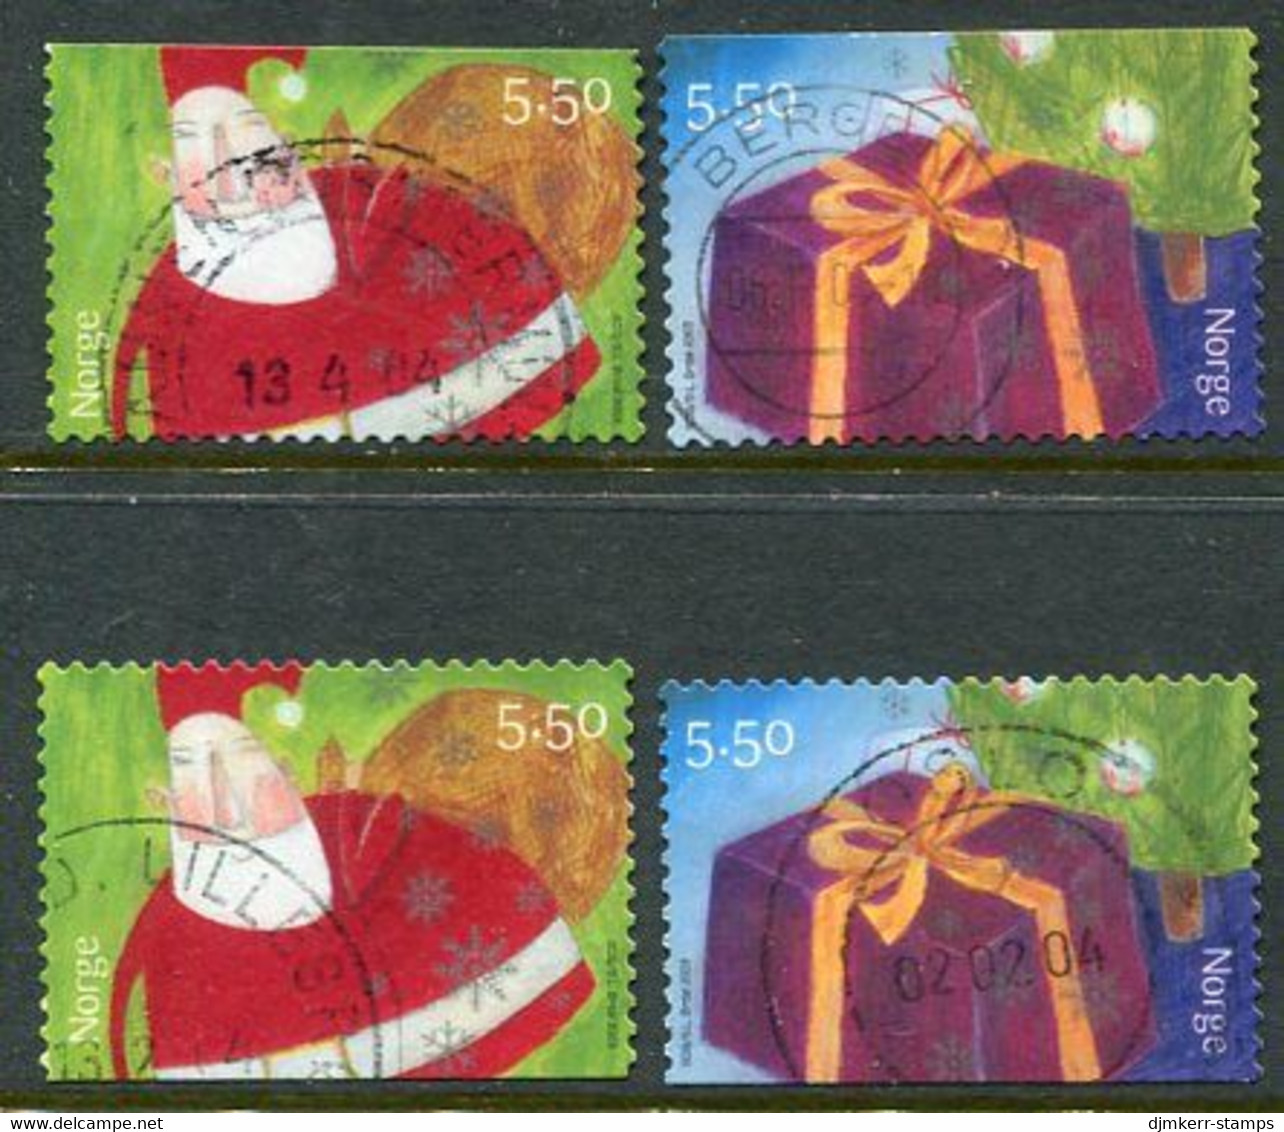 NORWAY 2003 Christmas Two Pairs Used.  Michel 1484-85 Dl-Dr - Usados